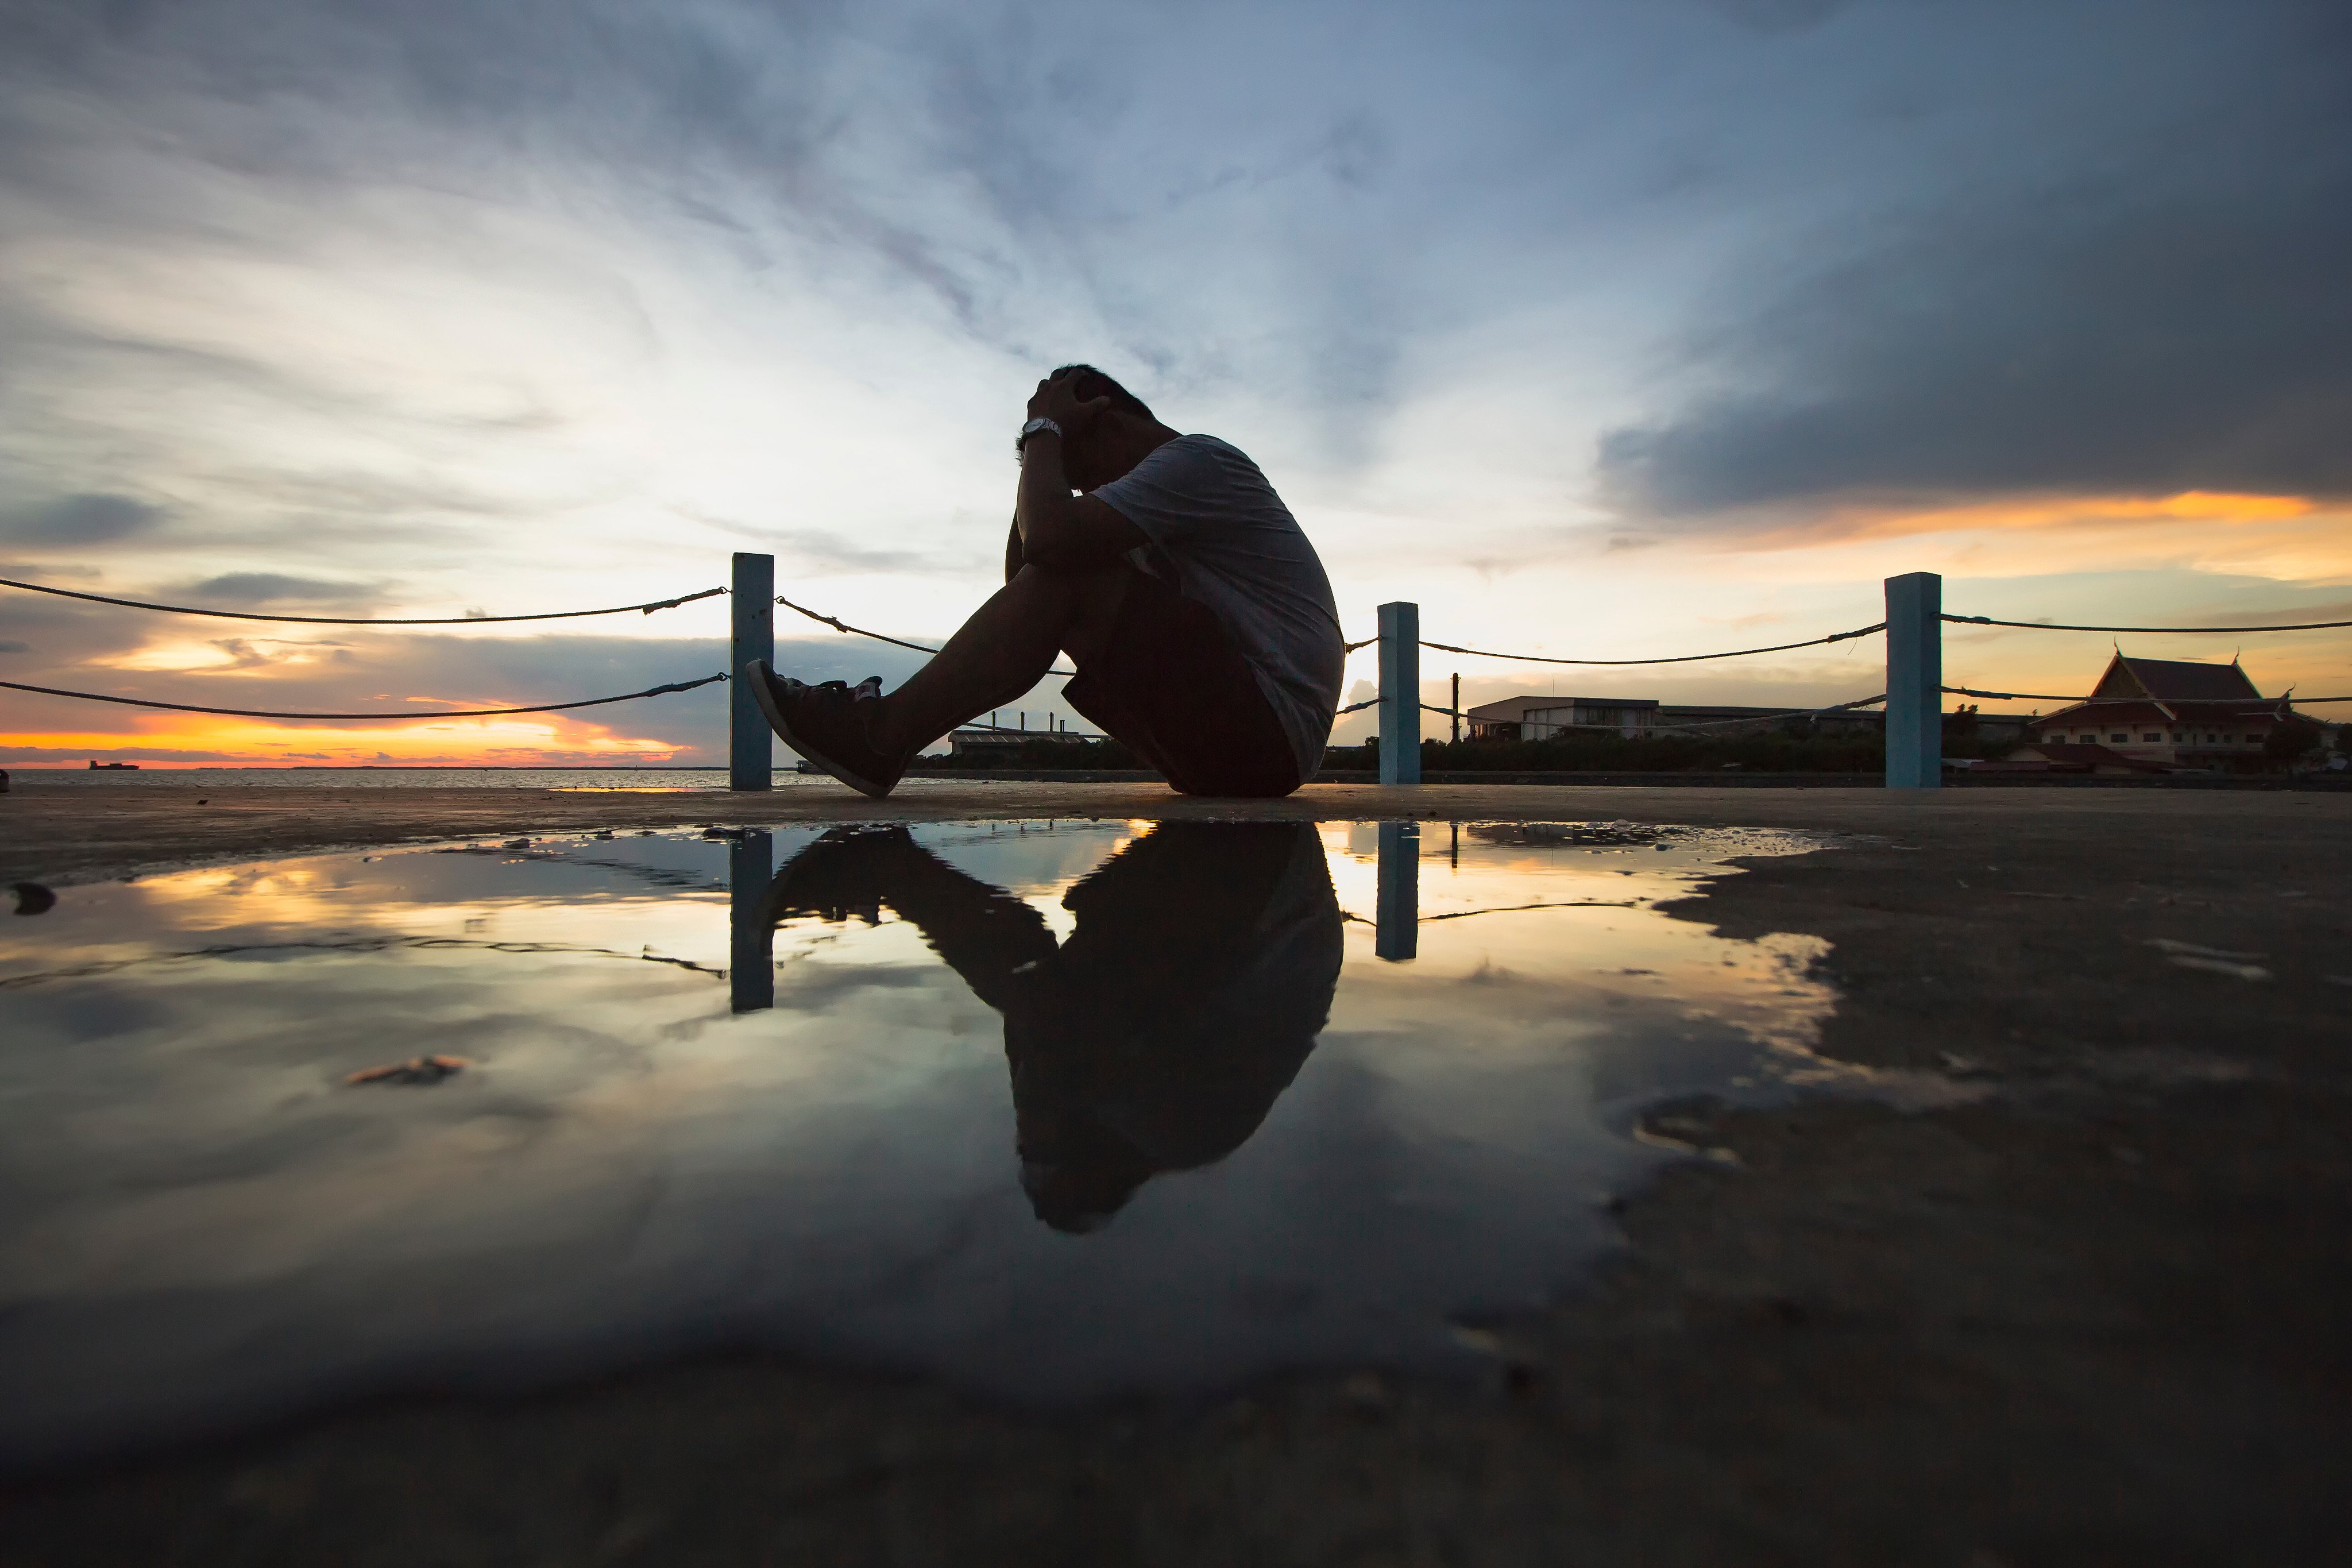 A suicide prevention group says about 52 per cent of cases, or 573, involved people aged between 20 to 59. Photo: Shutterstock